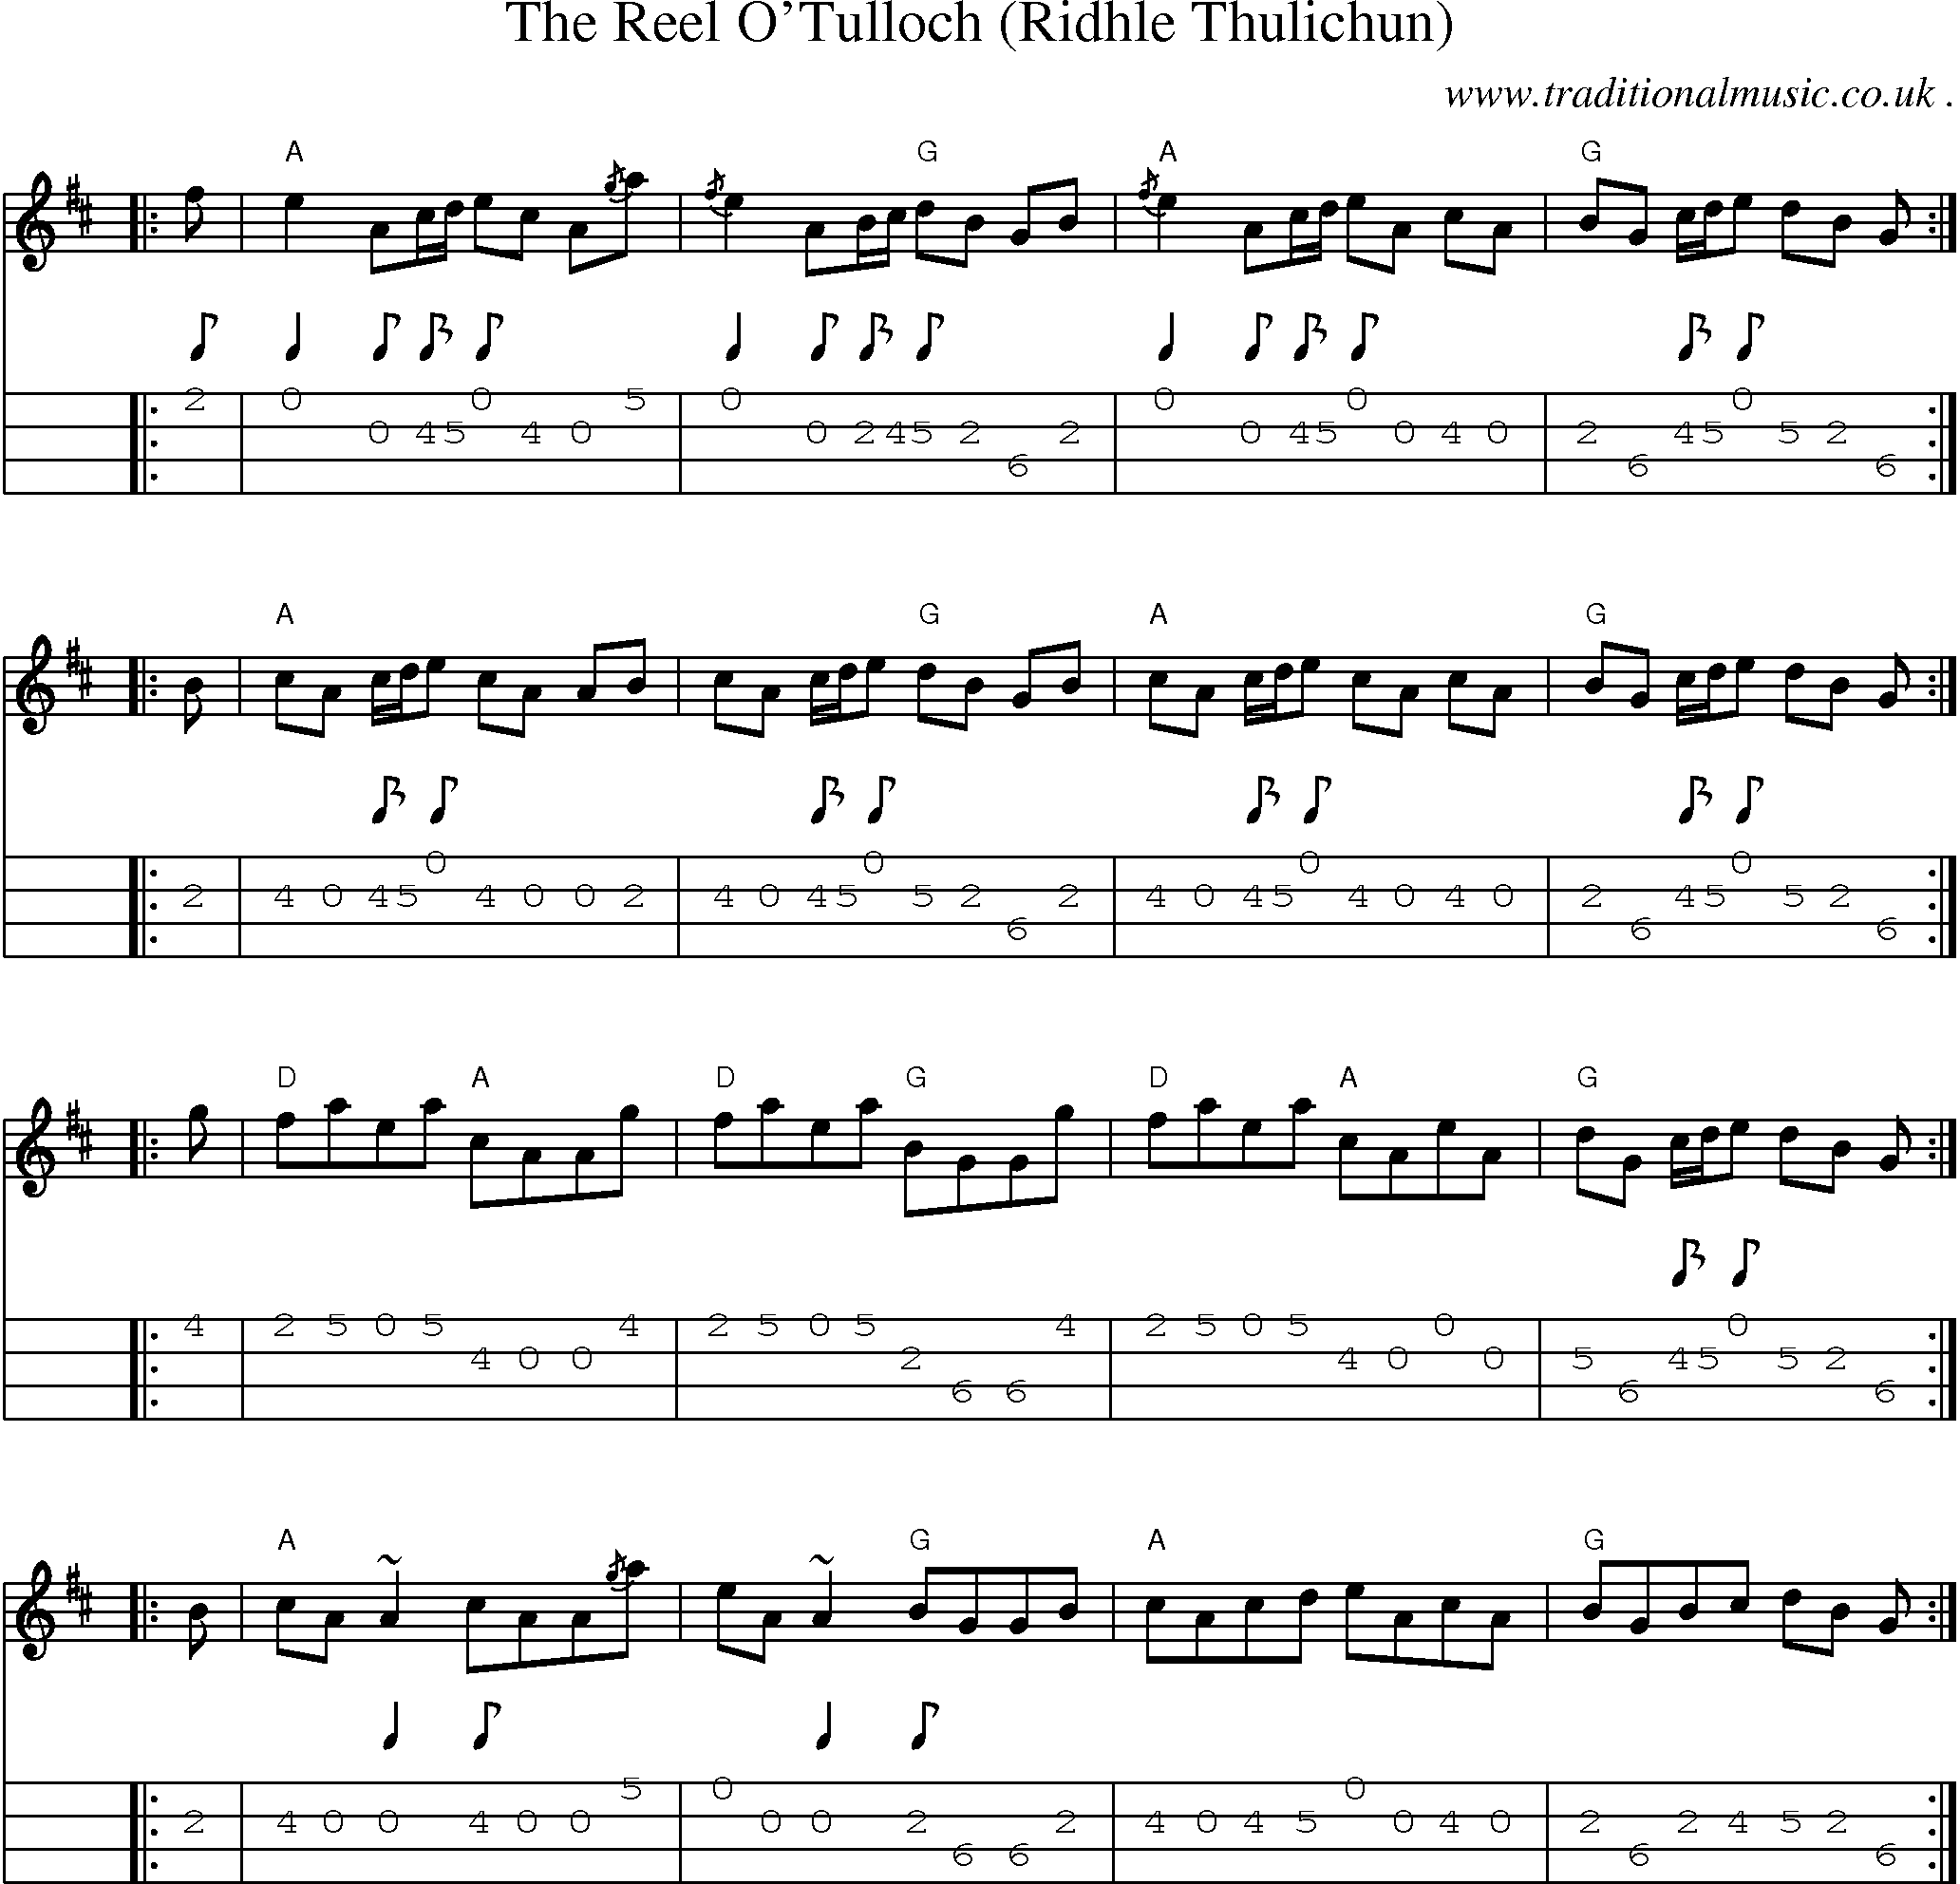 Sheet-music  score, Chords and Mandolin Tabs for The Reel Otulloch Ridhle Thulichun